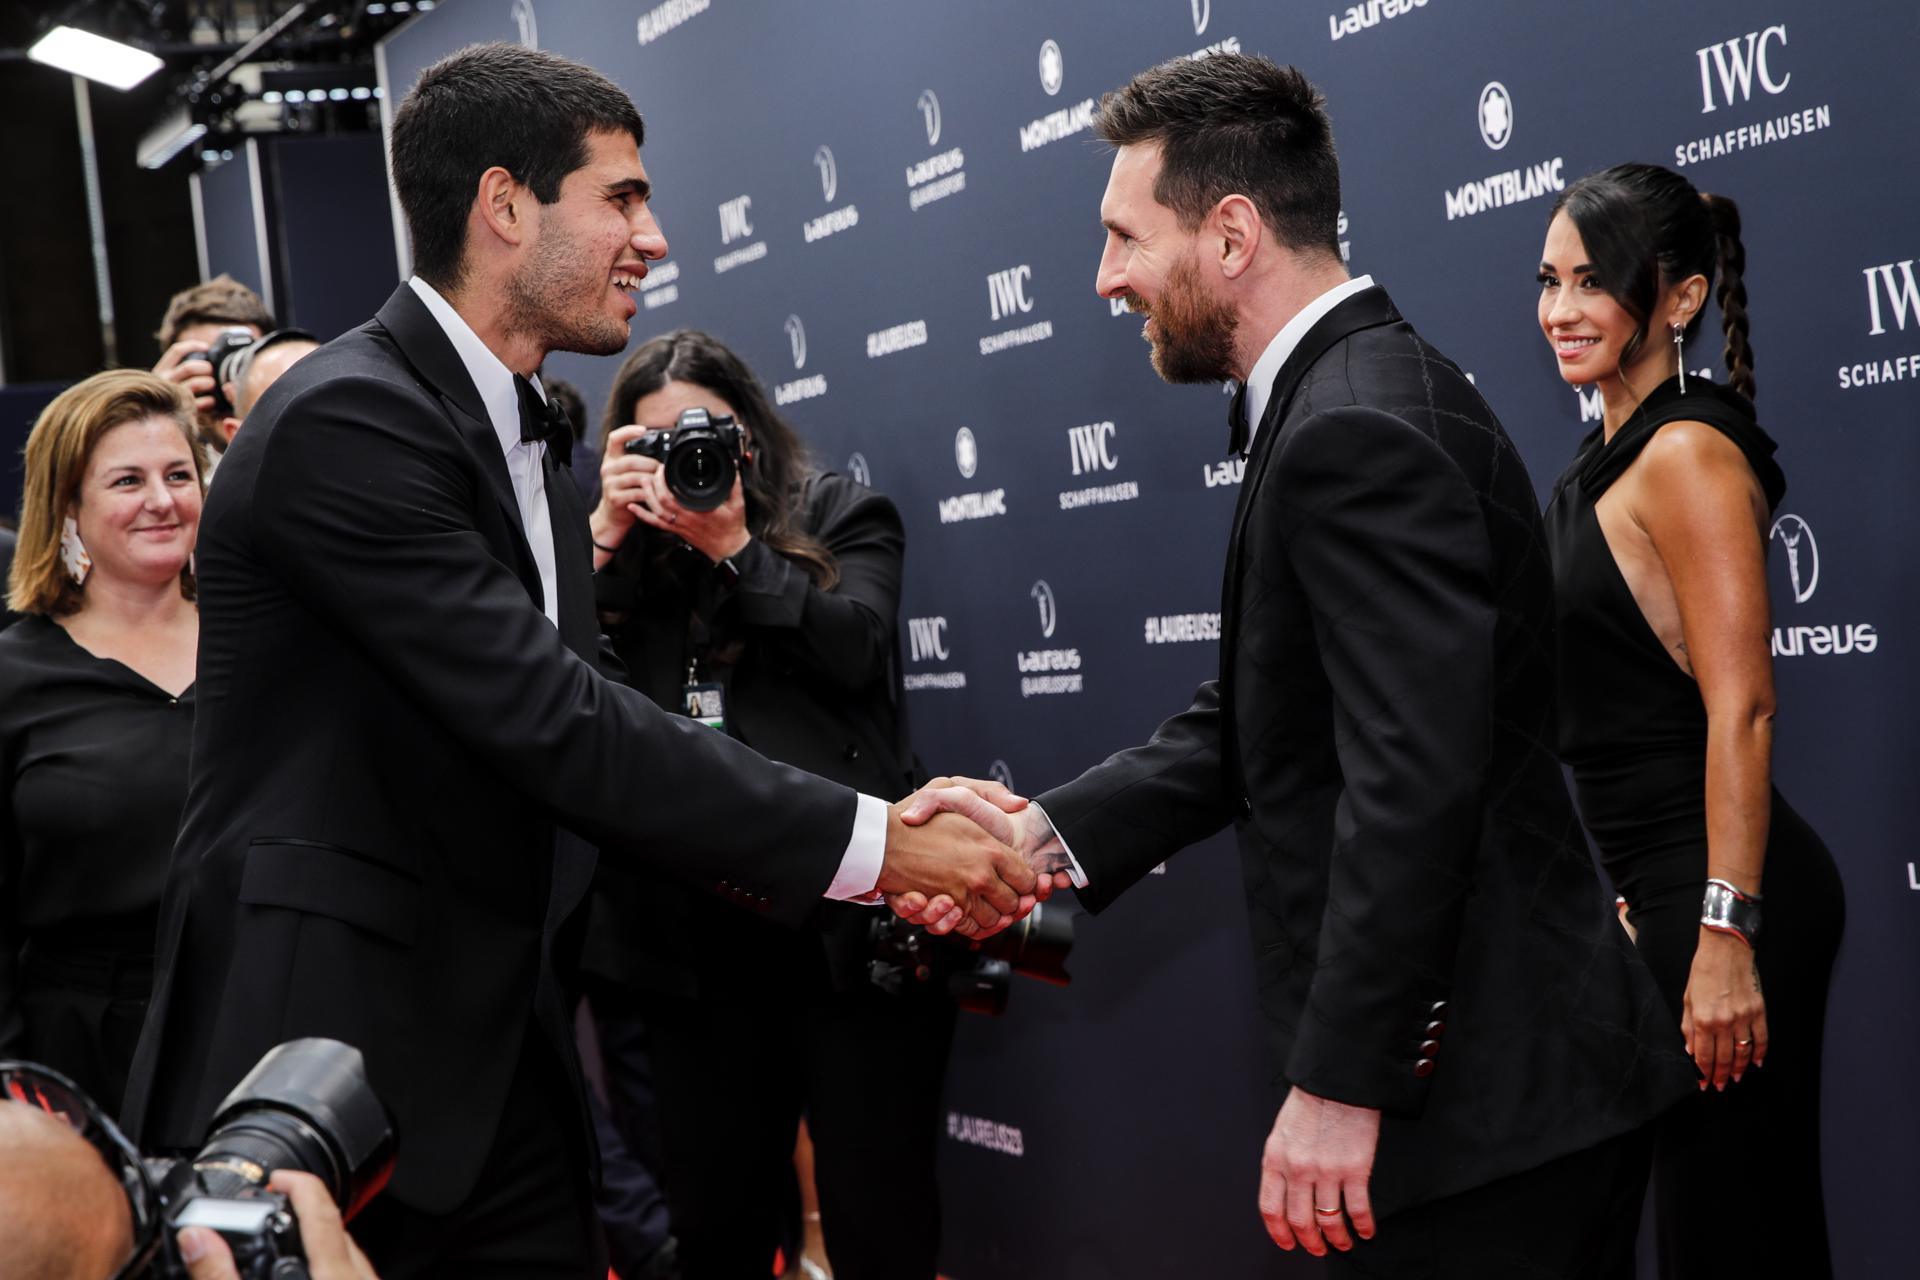 Argentine soccer great Lionel Messi, who became the first athlete to win Laureus World Sports Awards in both the team and individual categories in the same year shakes hands with Spanish tennis Carlos Alcaraz at the awards ceremony in Paris, France, on 8 May 2023. The 20-year-old Alcaraz was honored in the World Breakthrough of the Year category. EFE/EPA/TERESA SUAREZ